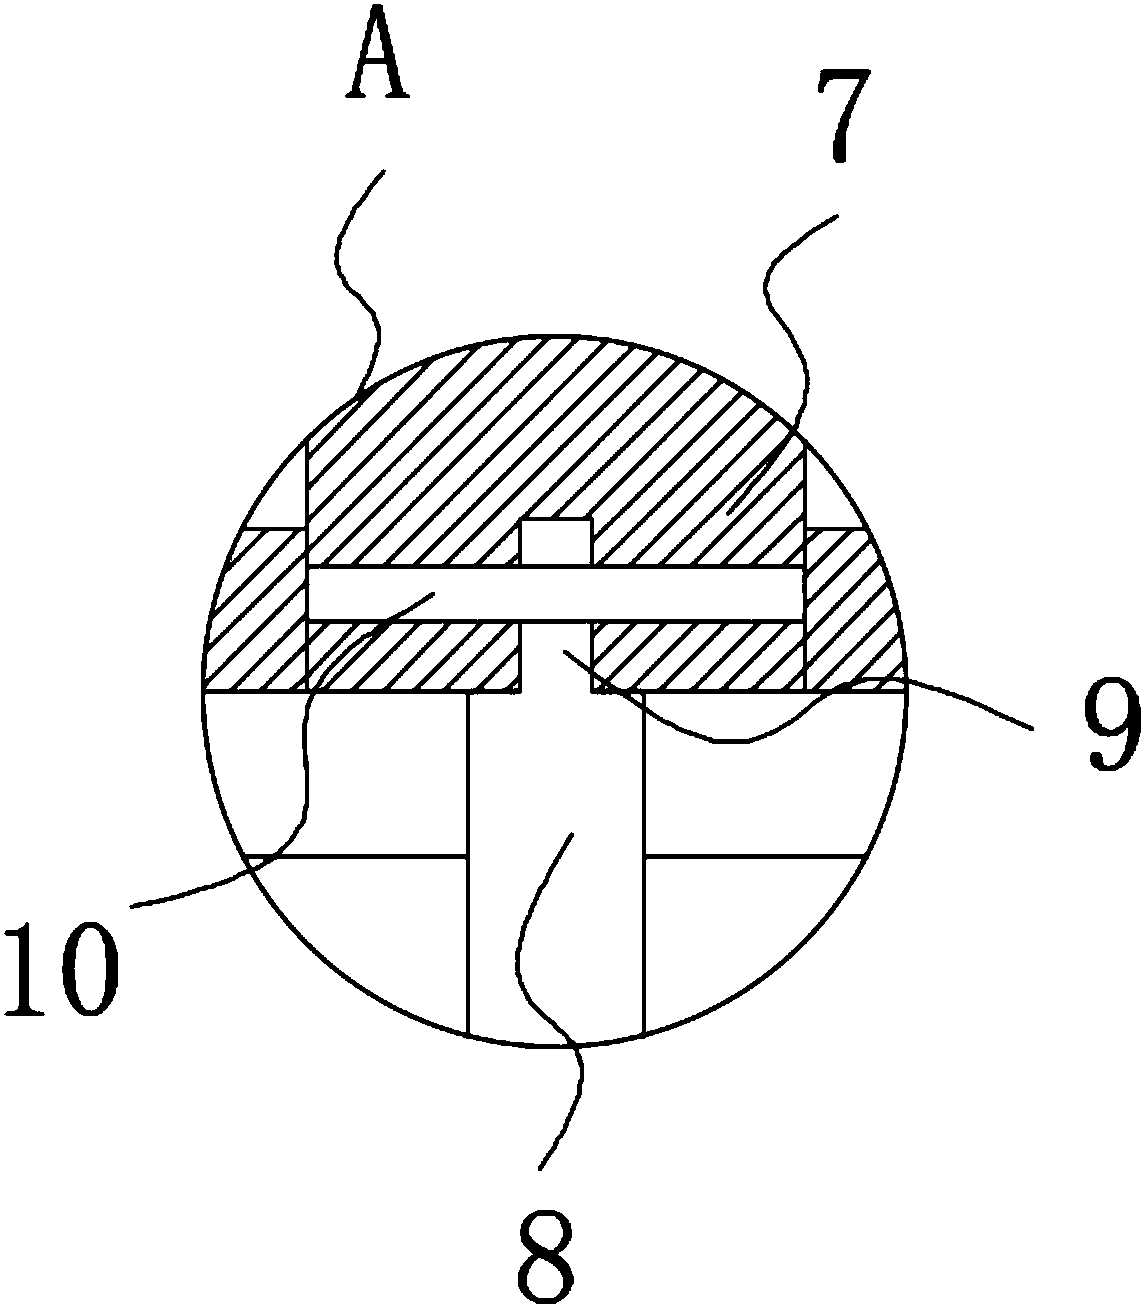 Dyeing device for flax textile processing